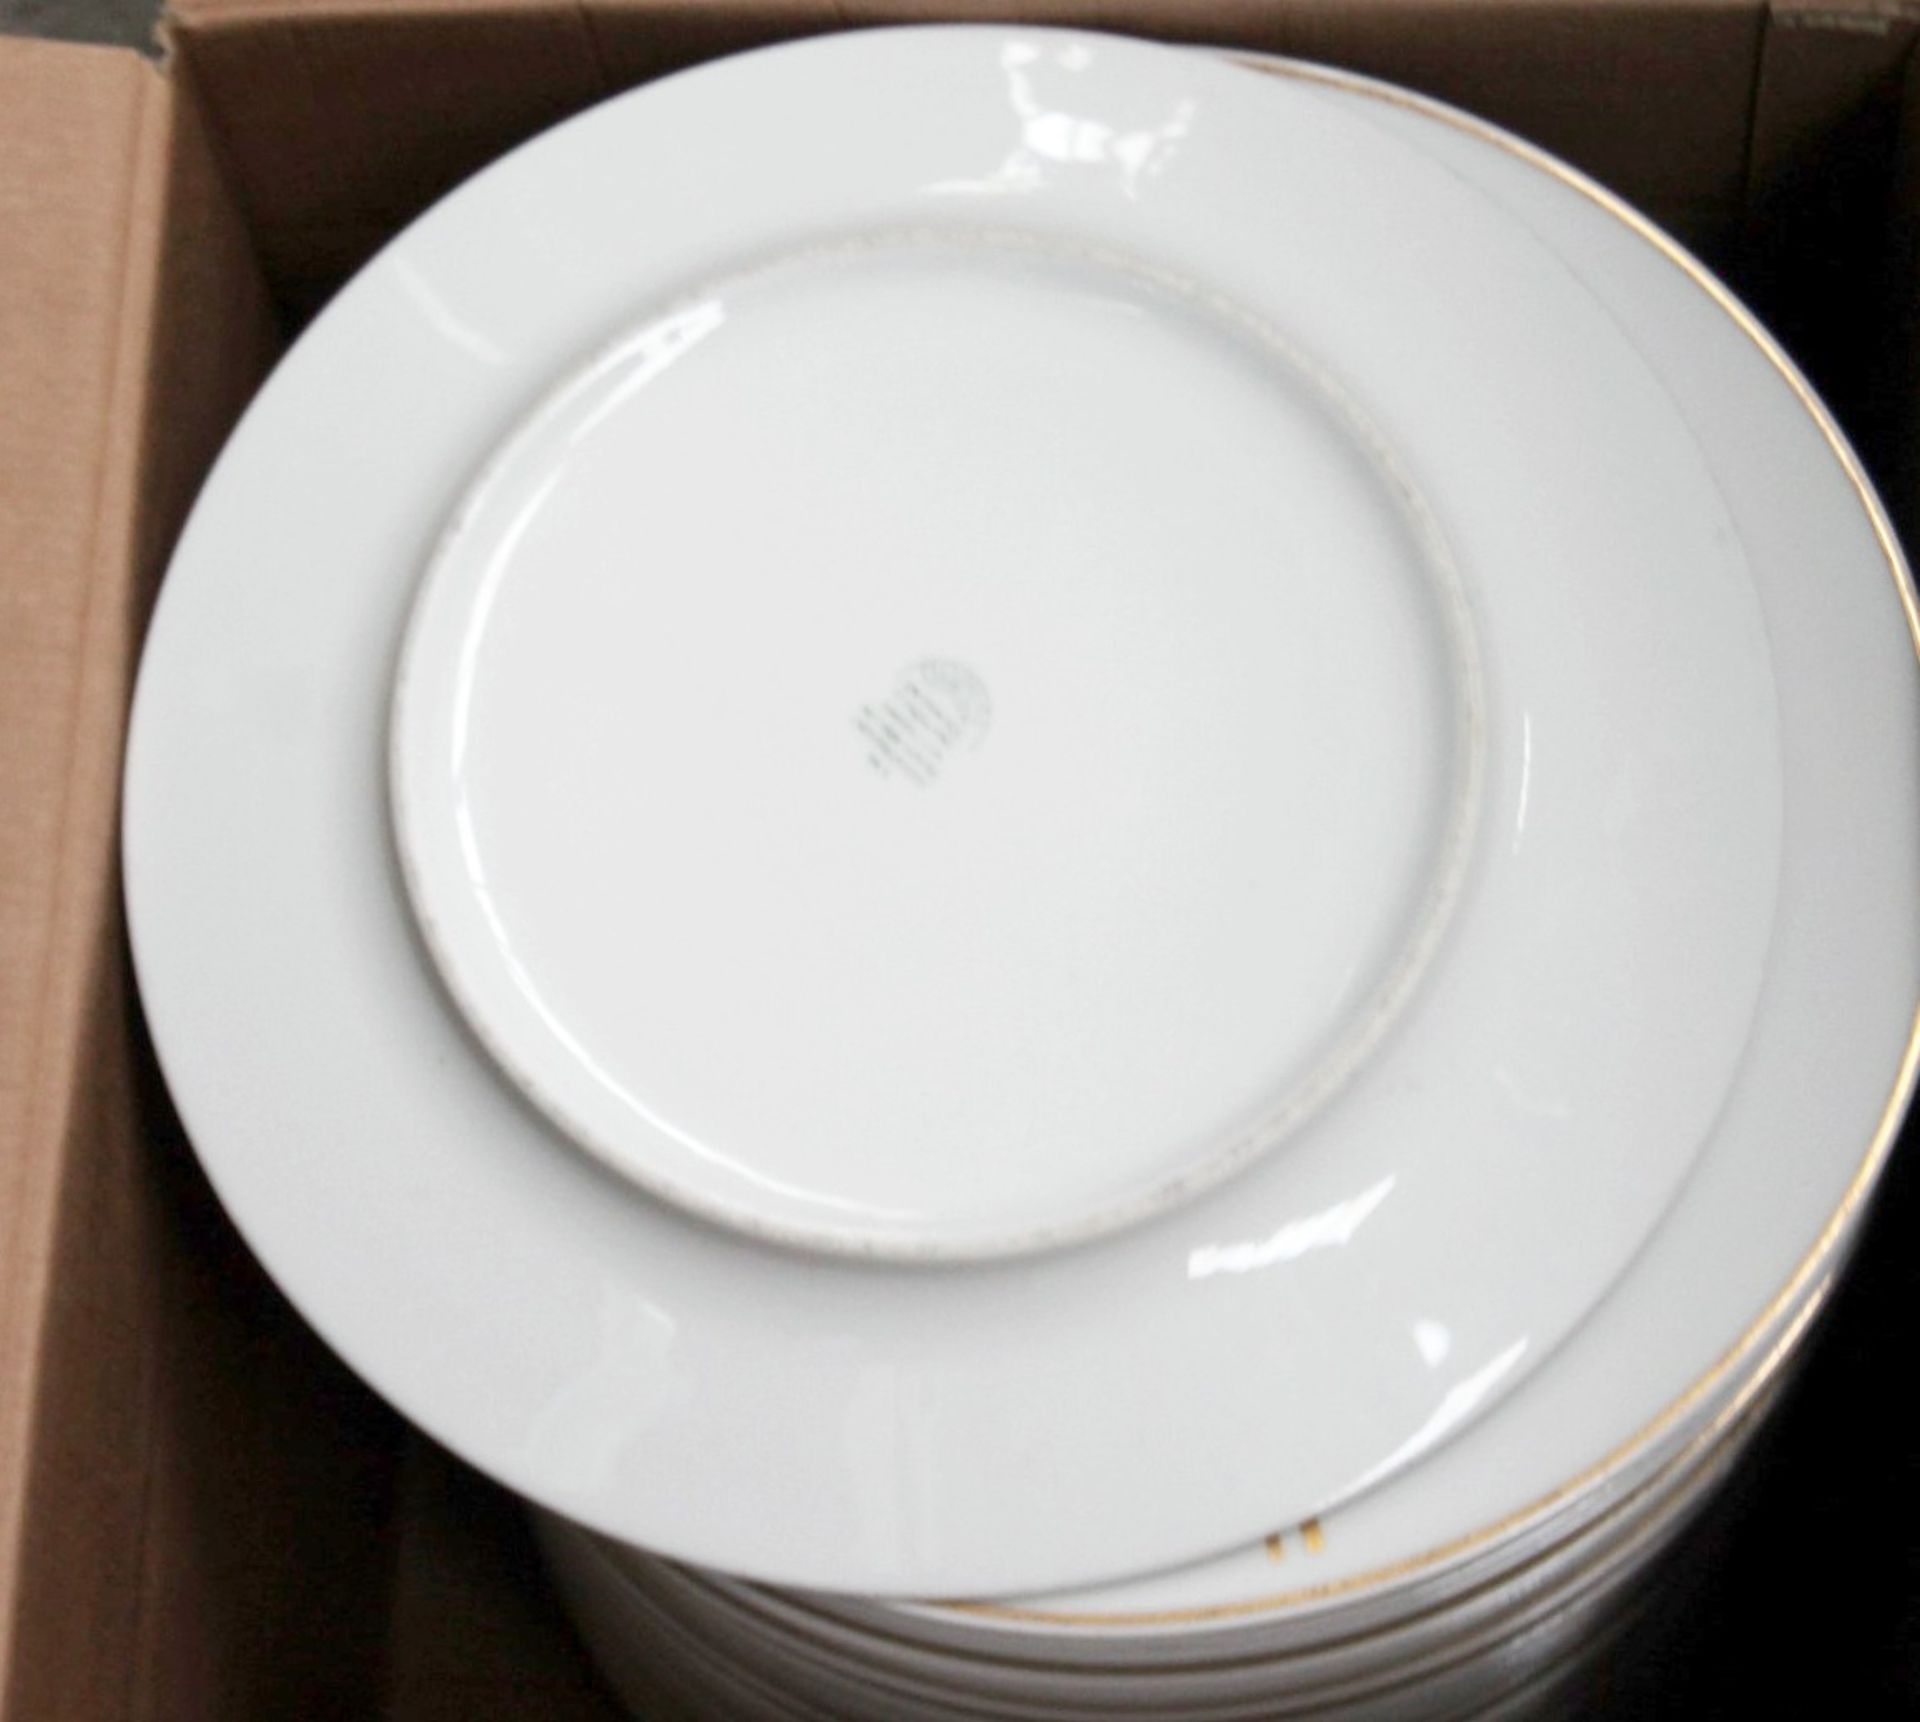 25 x PILLIVUYT Porcelain Dinner Plates In White Featuring 'Famous Branding' In Gold - Dimensions: - Image 5 of 5